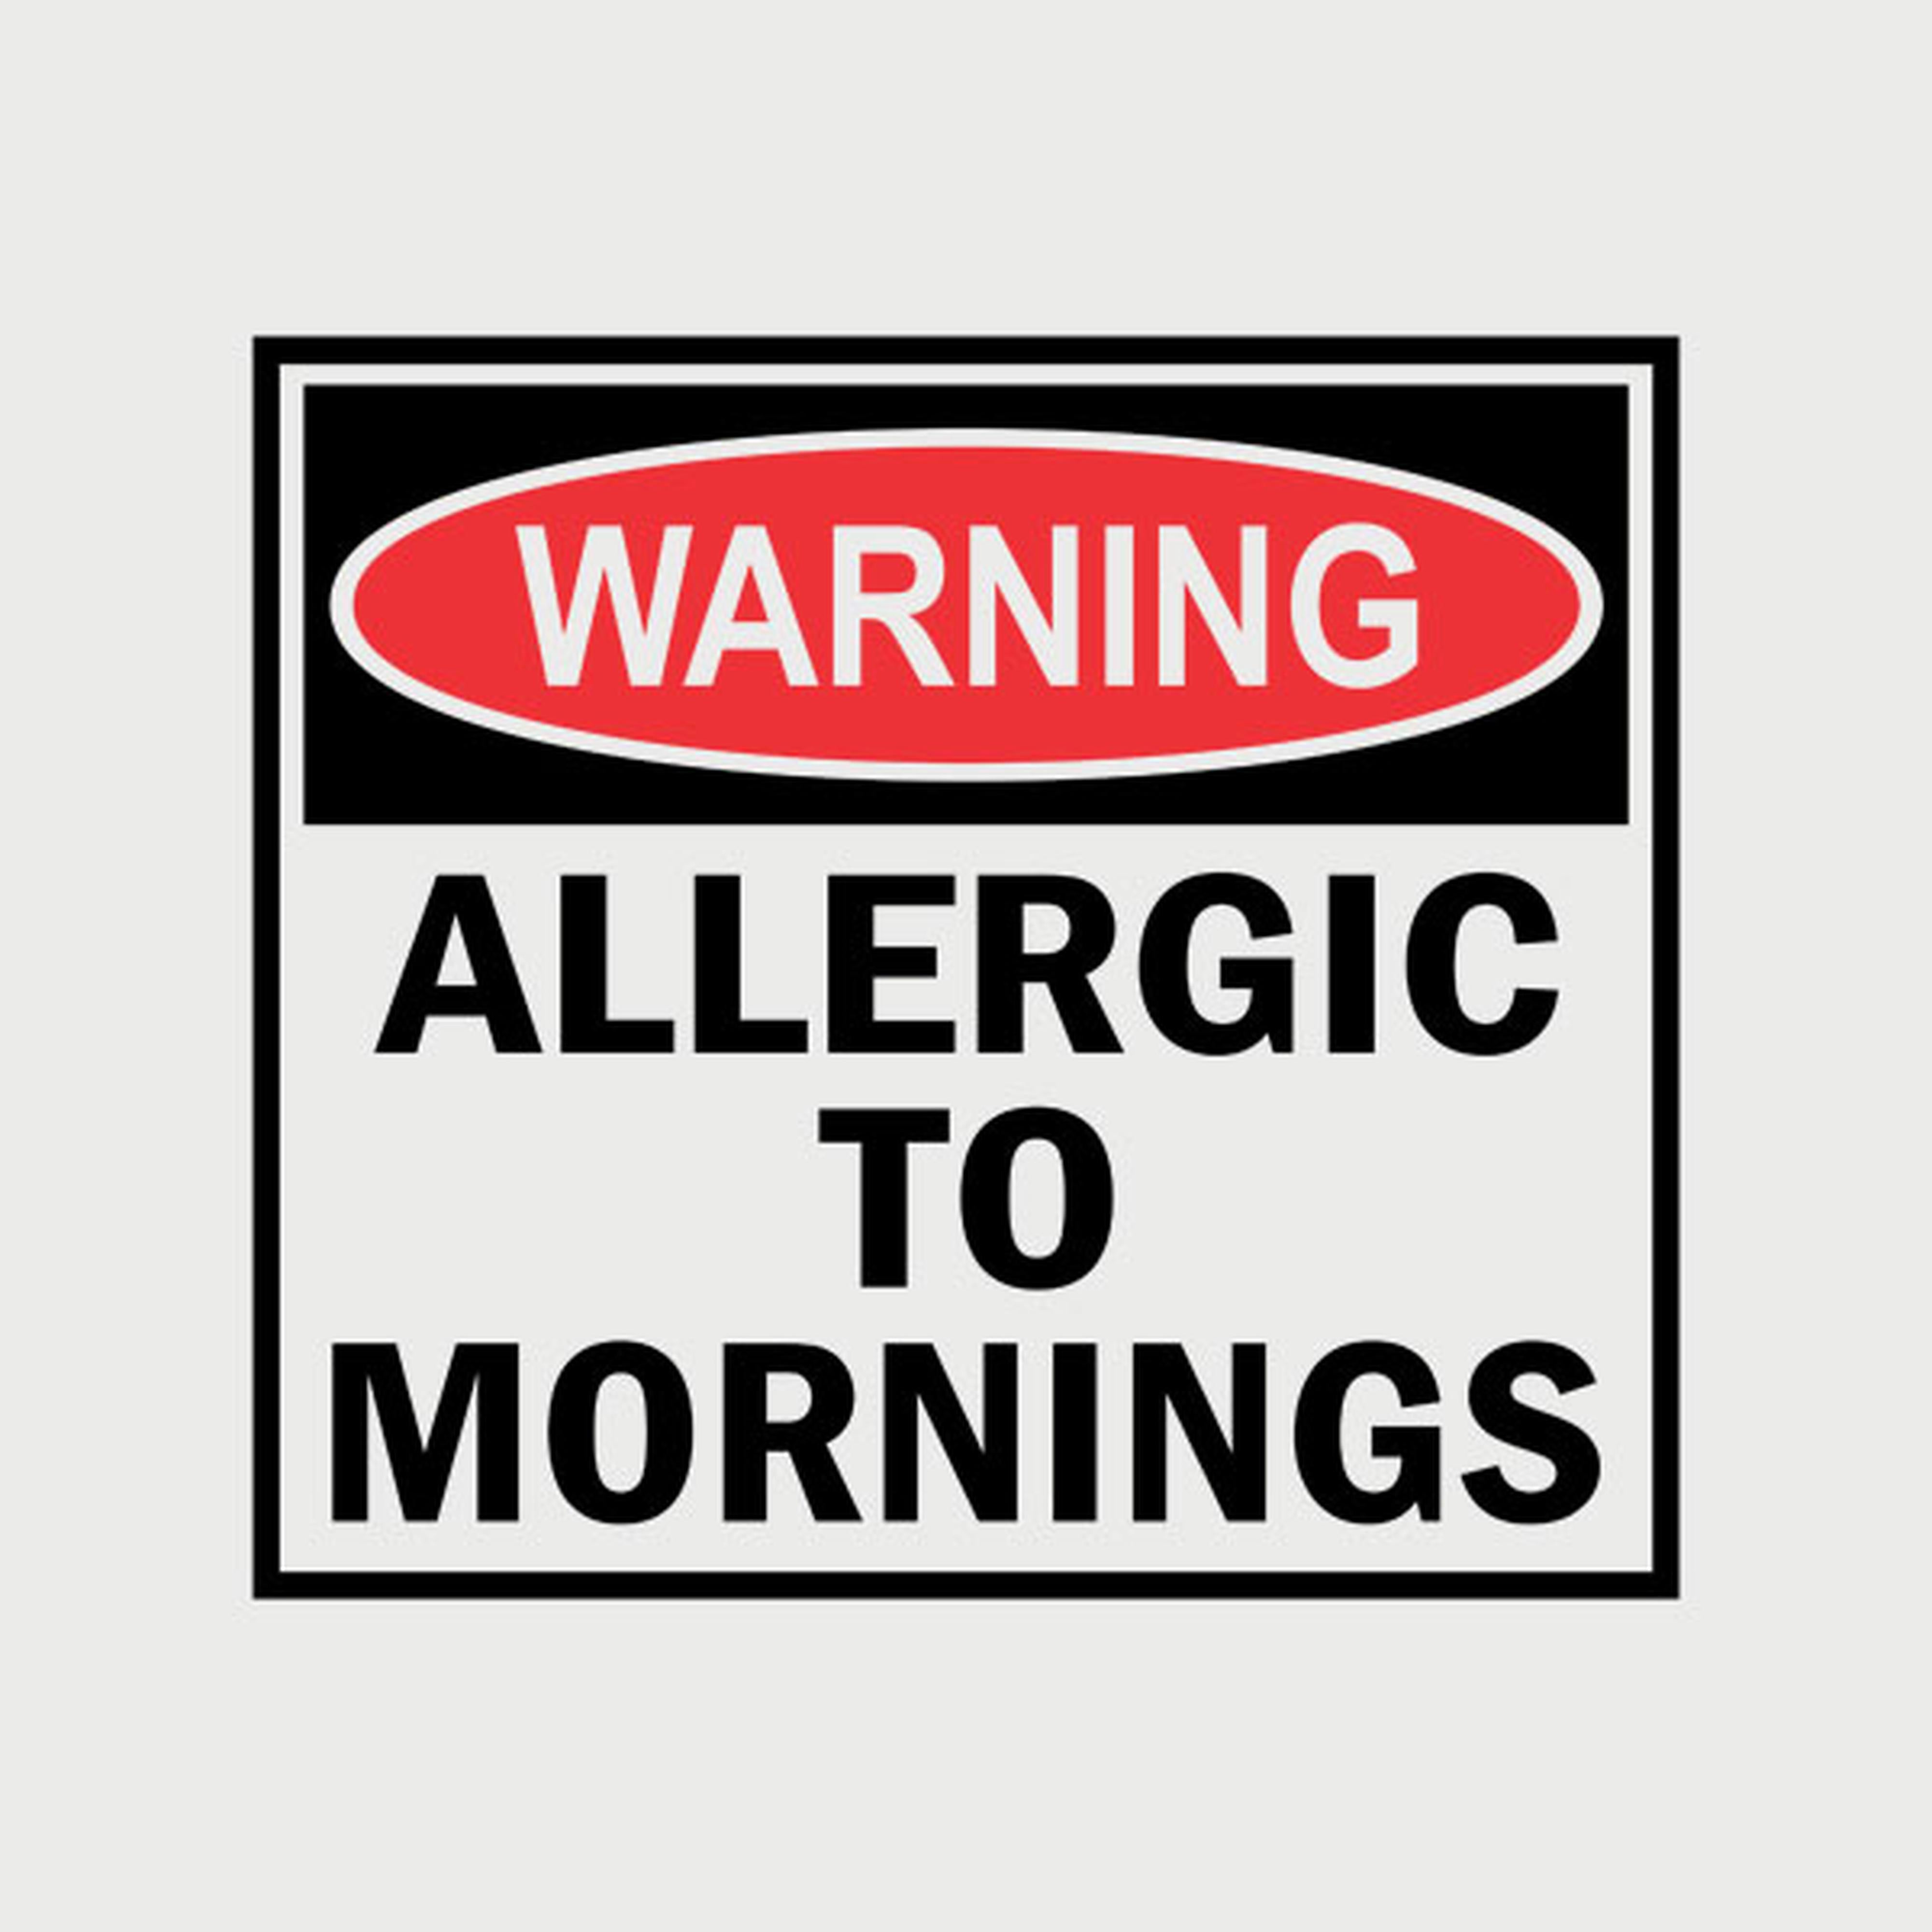 Allergic to mornings